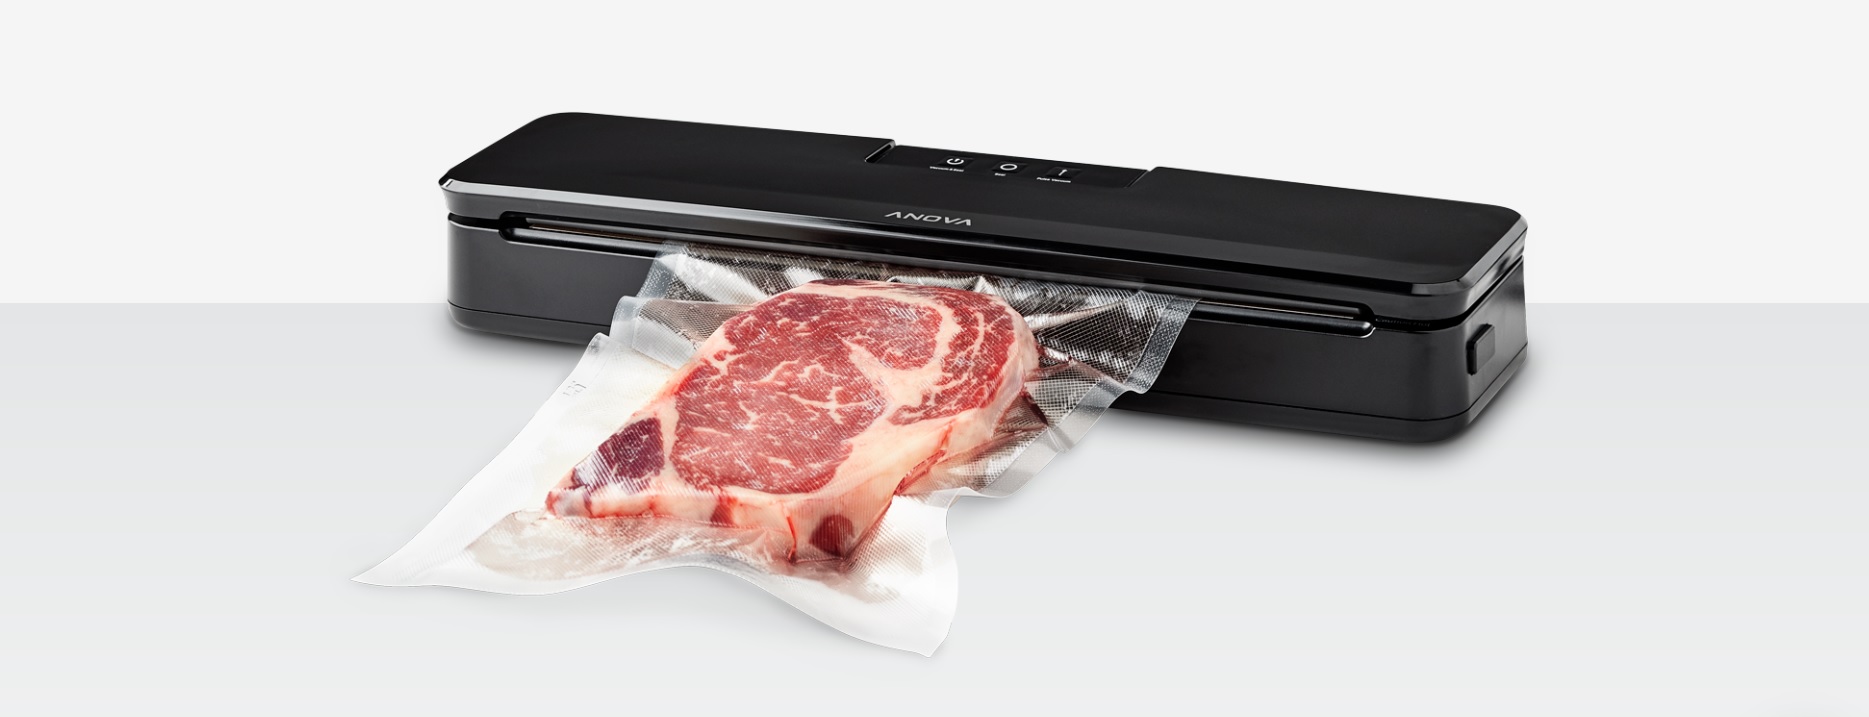 Anova Launches New And Improved Vacuum Sealer Bags That Are 100 Percent  Plastic Neutral through Partnership With Plastic Bank®